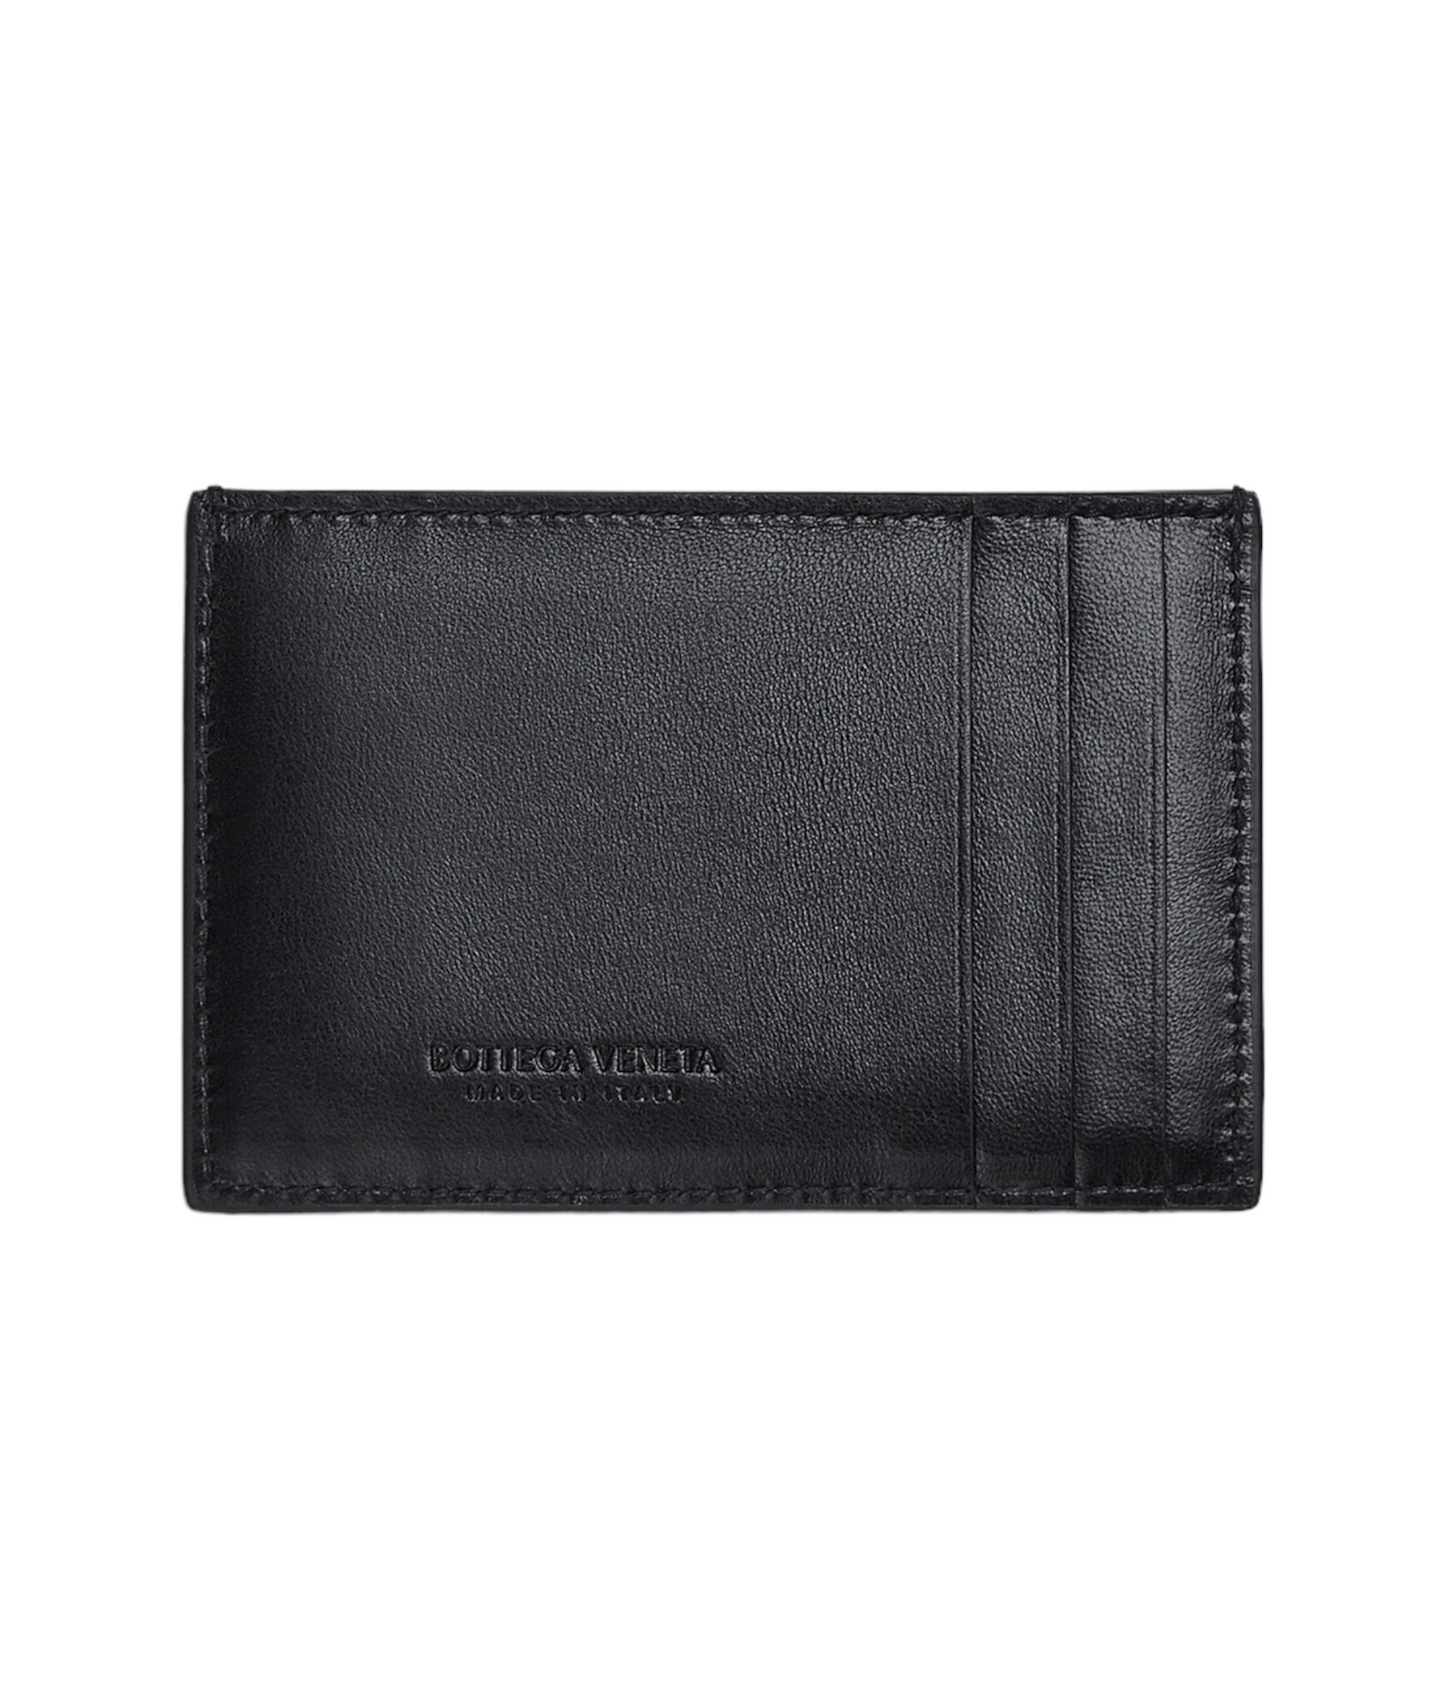 Bottega Veneta Black Leather Credit Card Case - Genuine Design Luxury Consignment for Men. New & Pre-Owned Clothing, Shoes, & Accessories. Calgary, Canada